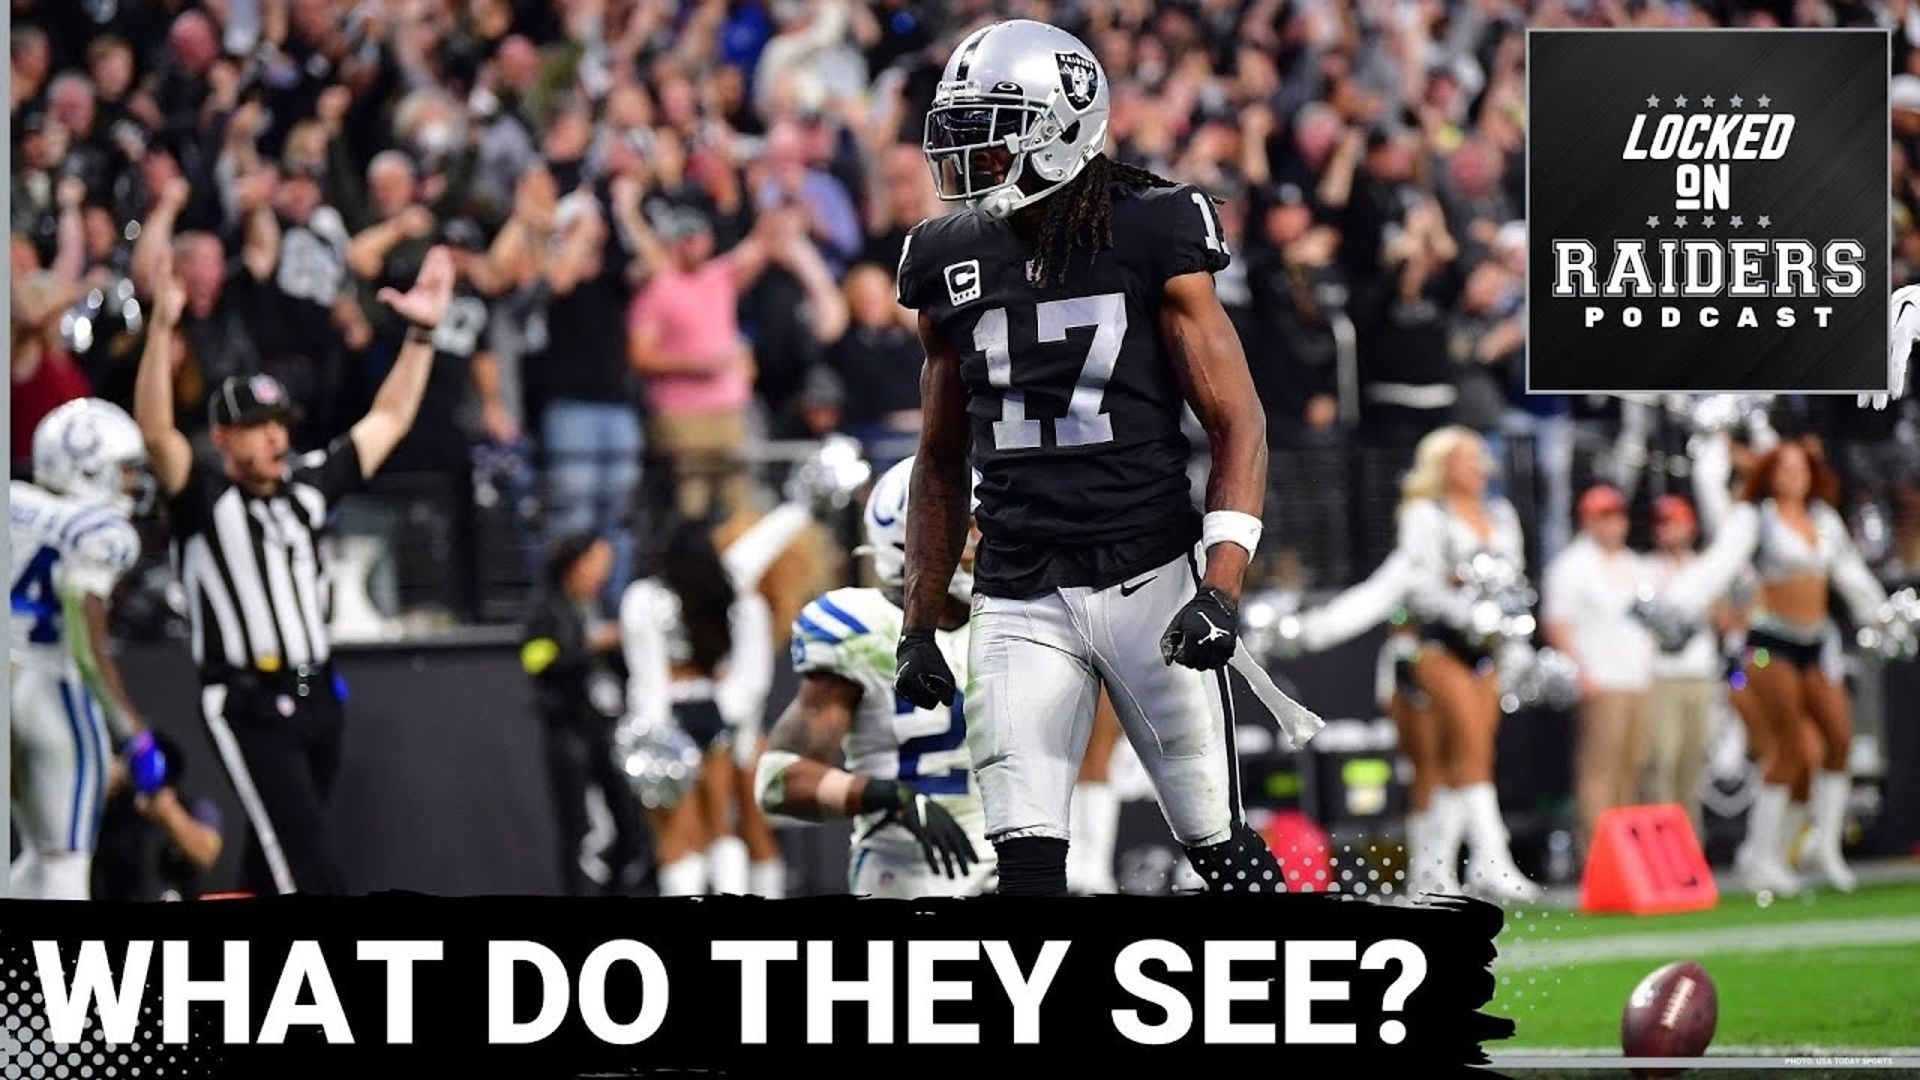 We will hear from ESPN's Bill Barnwell on how the Raiders can compete for one of the top 7 spots in the AFC.